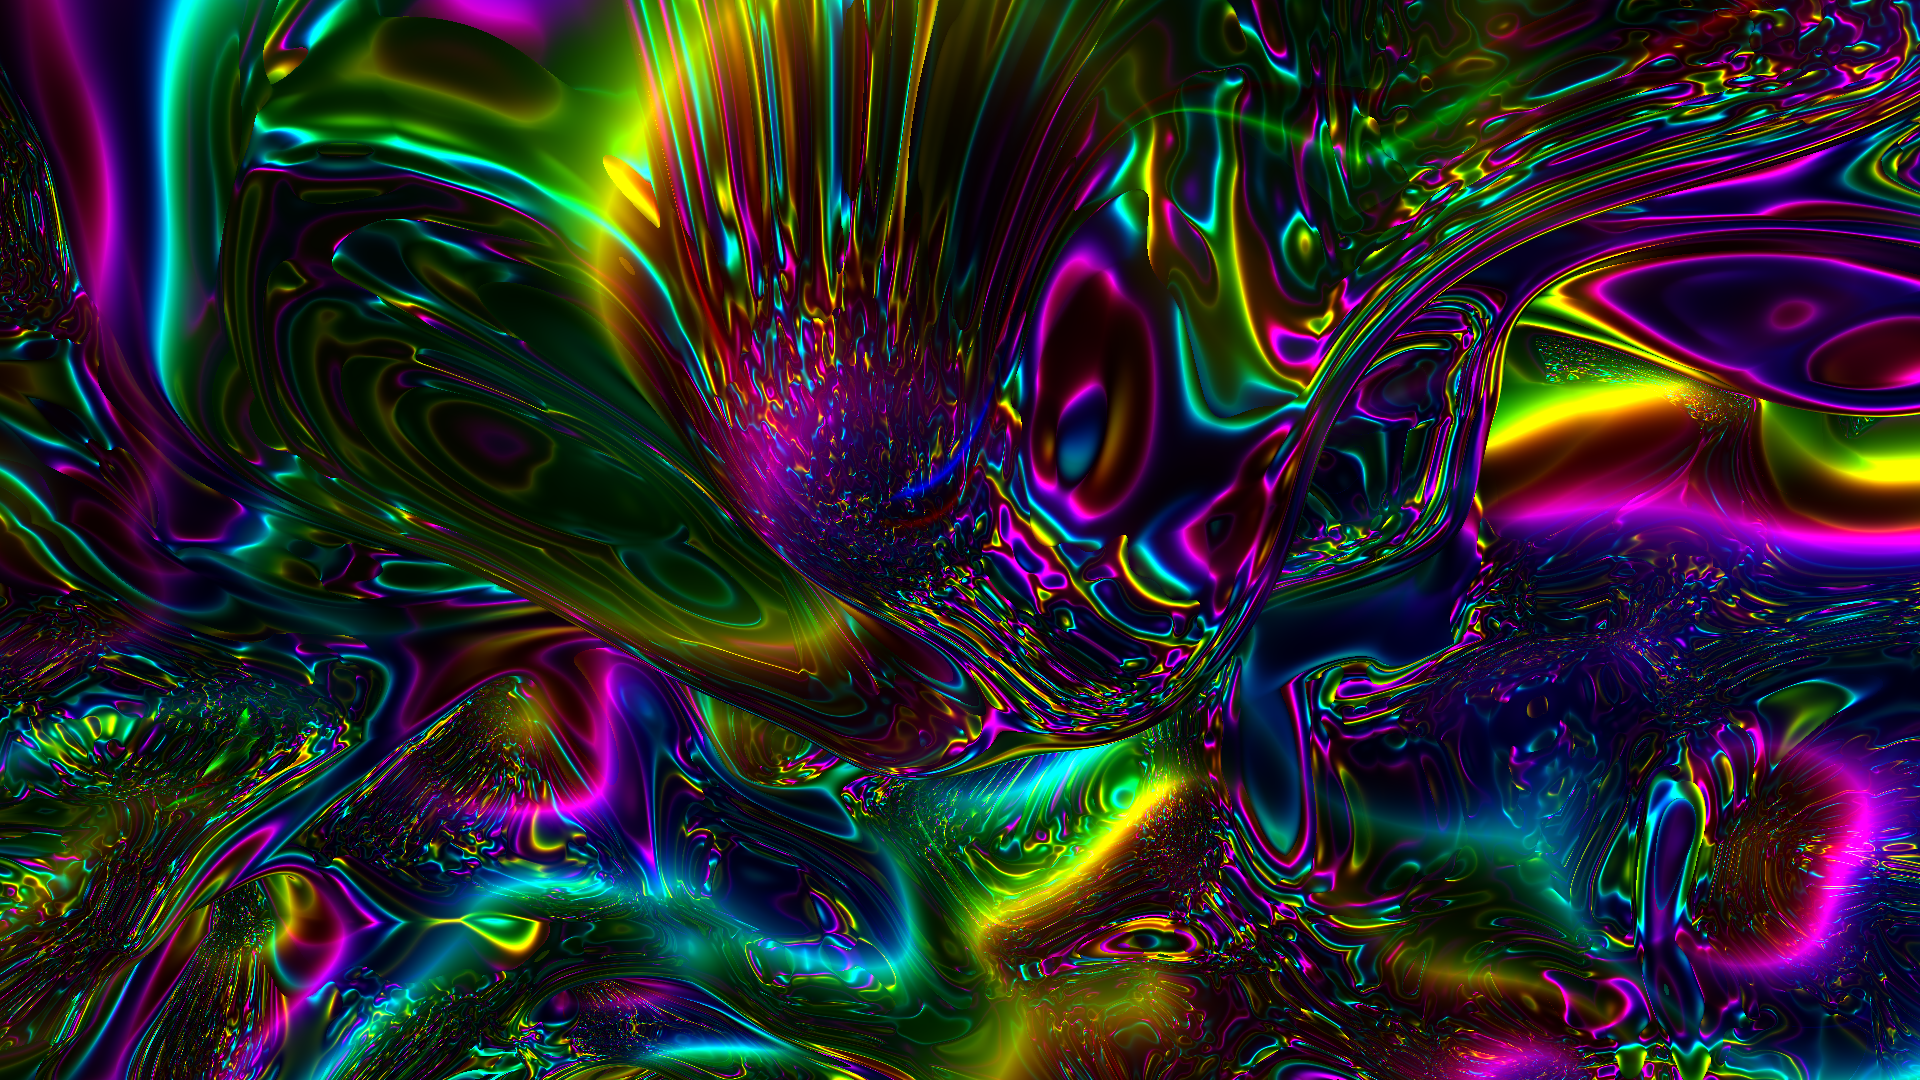 Wallpaper 1080p Displaying Image For Psychedelic